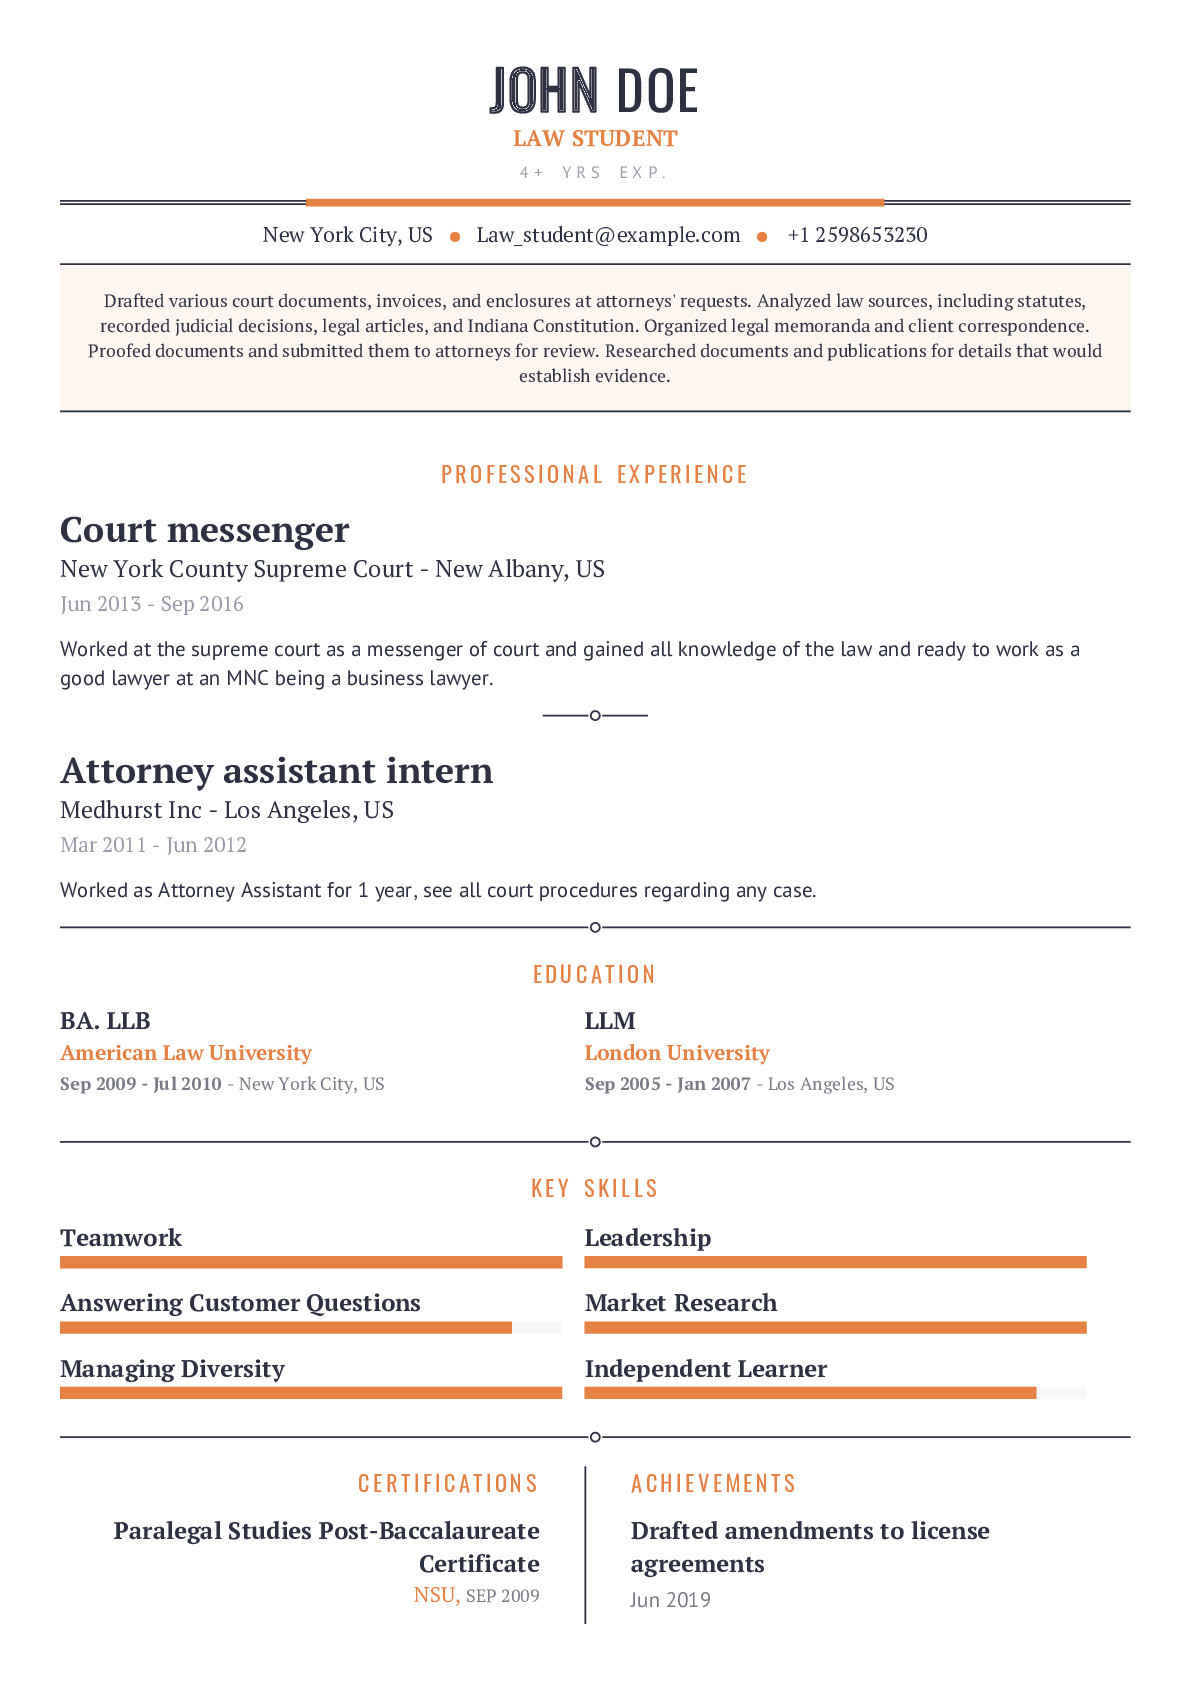 Resume Sample Judicial Law Clerk Supreme Court Law Student Resume Example with Content Sample Craftmycv